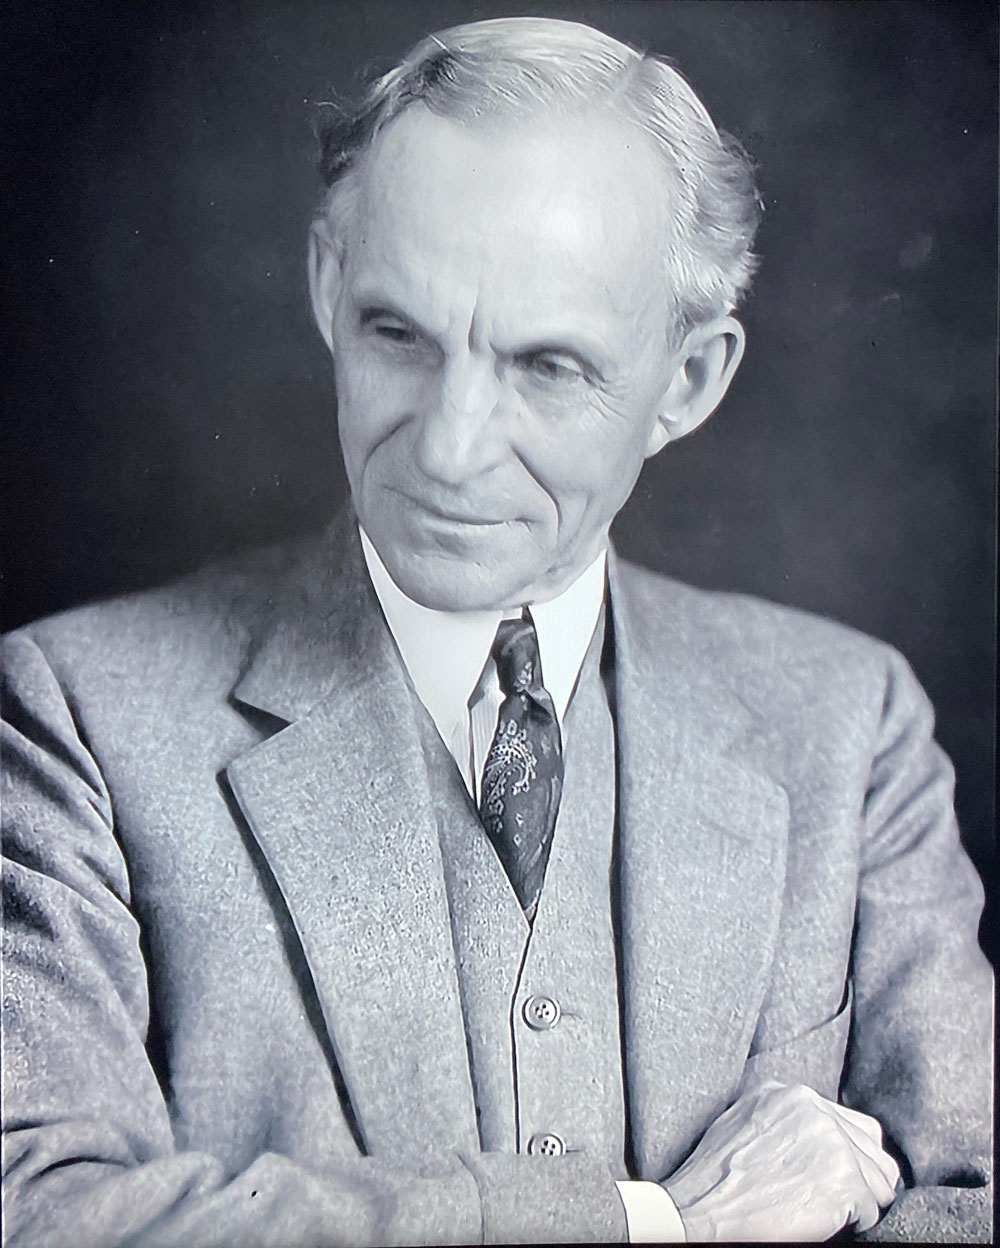 The 24 Hour War henry ford